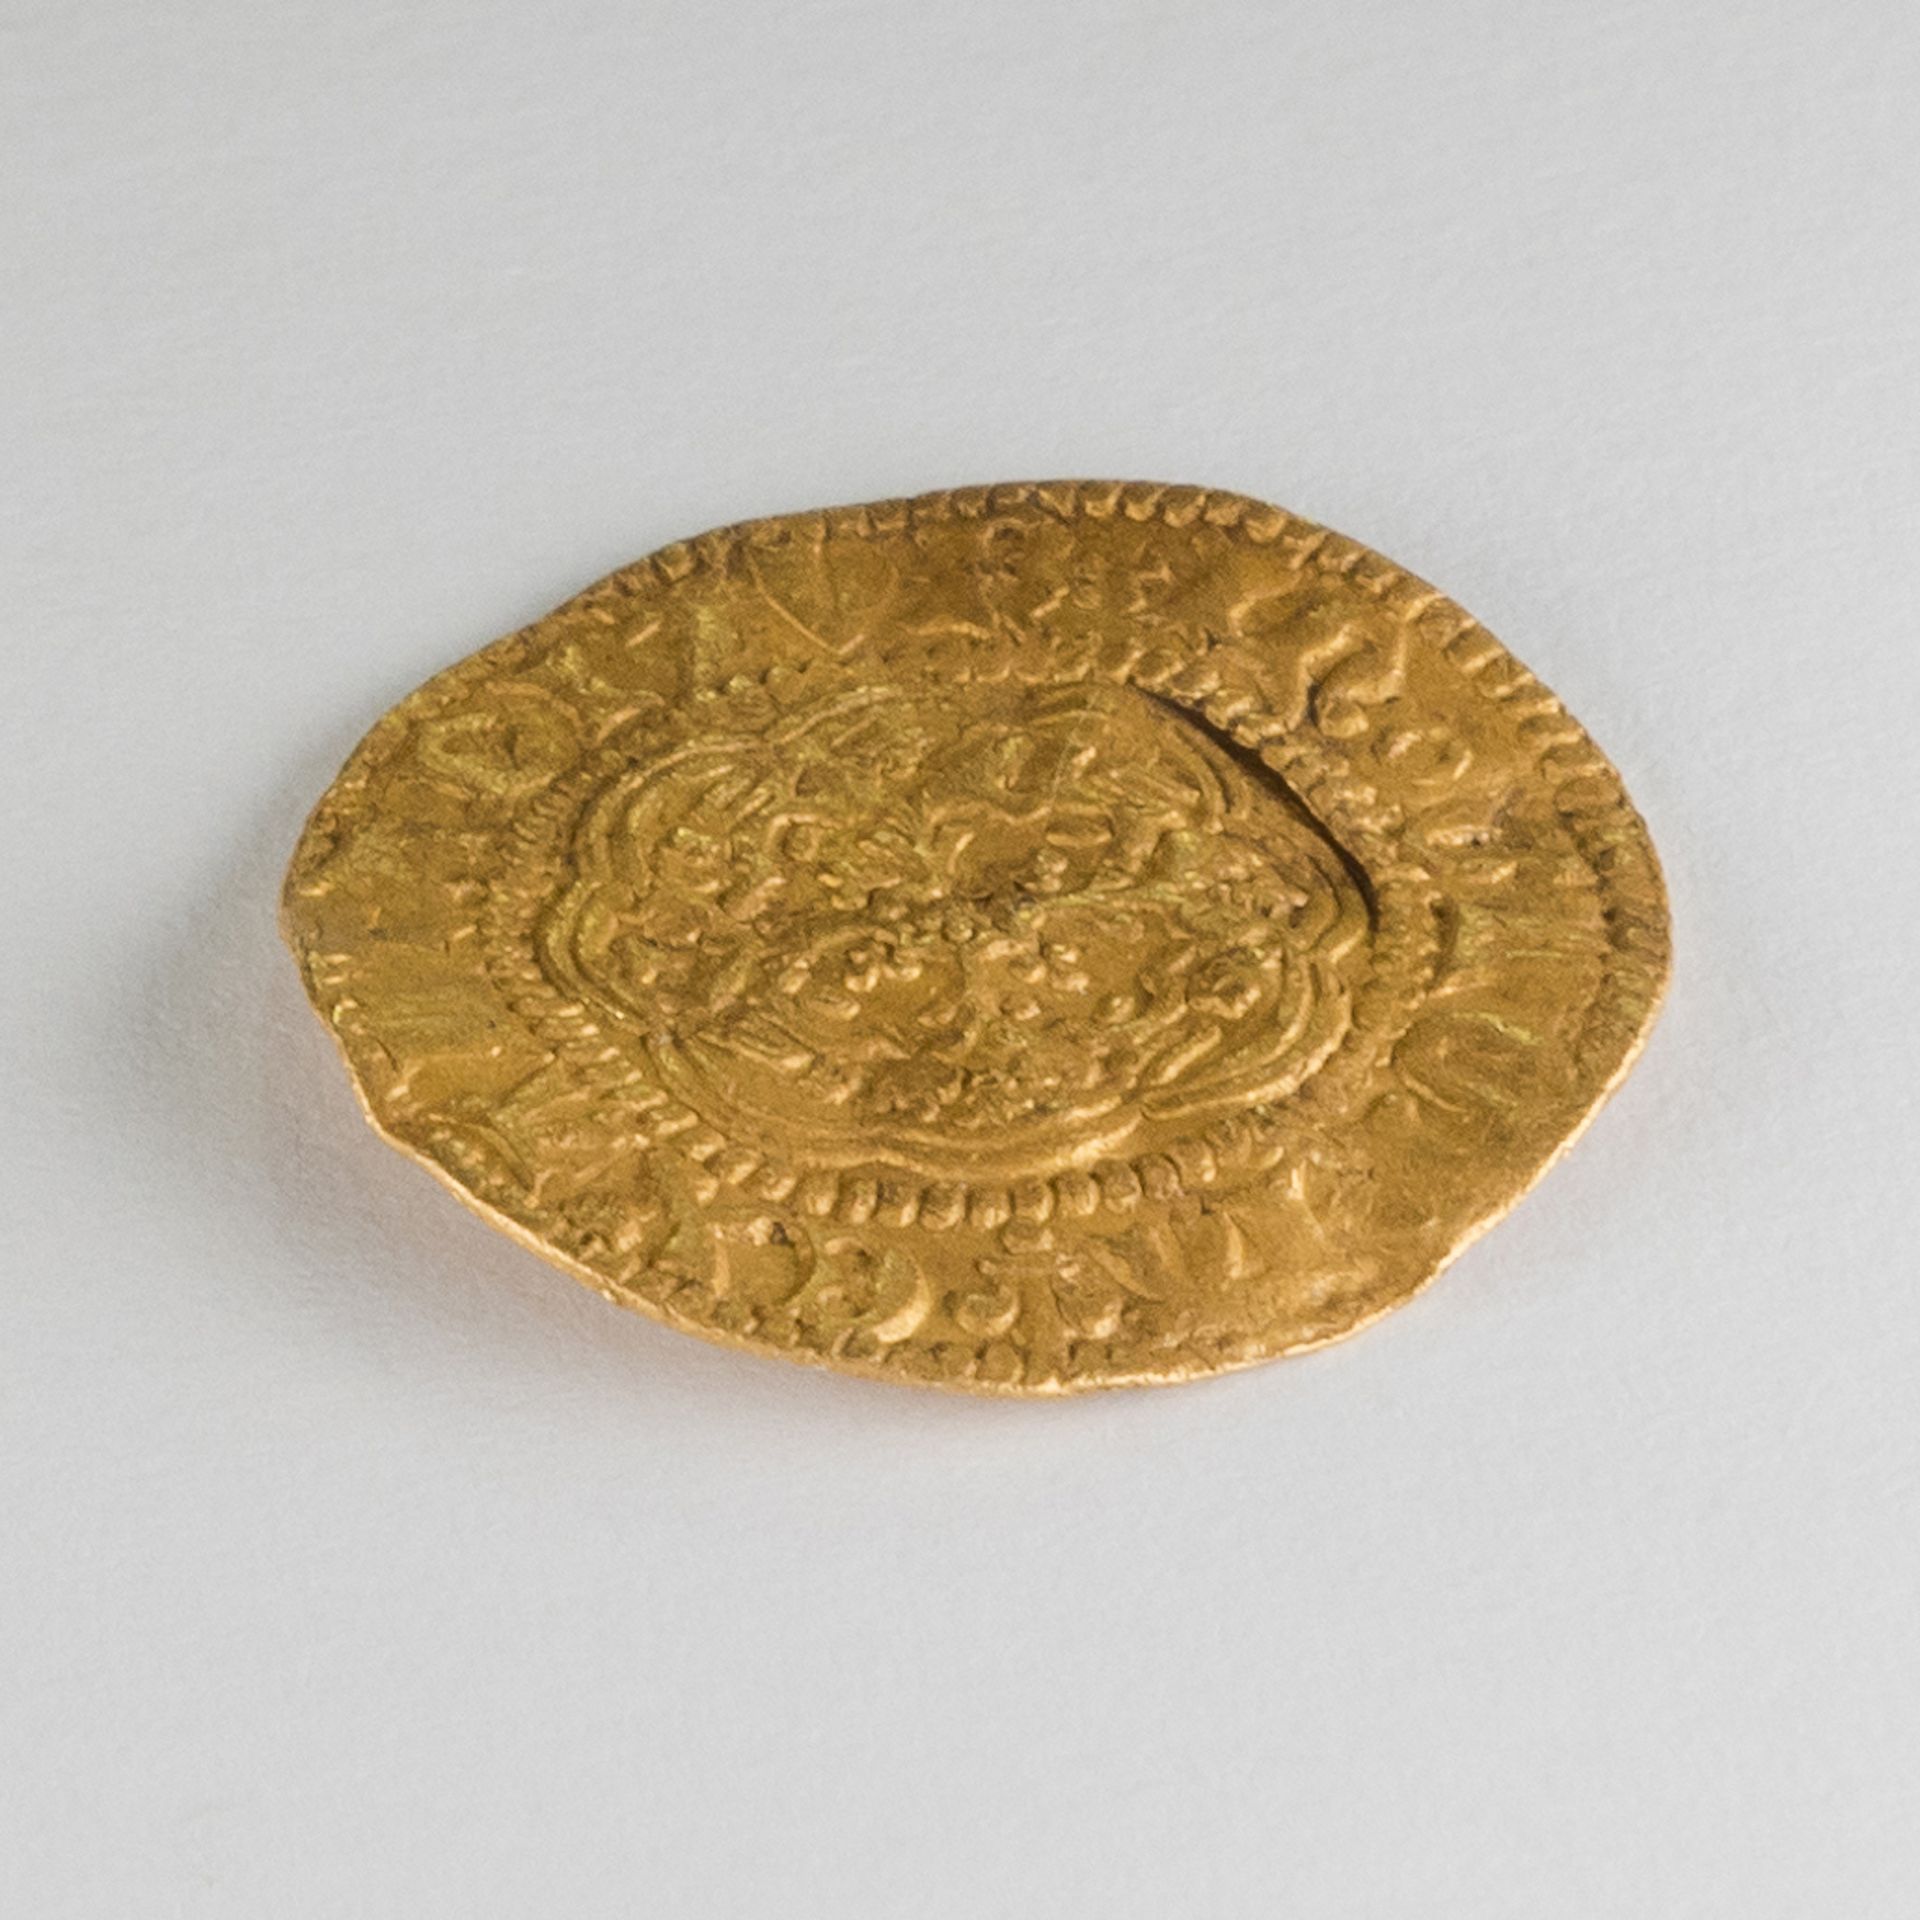 A Henry VI quarter noble, minted in London between 1422 and 1427, and recently discovered in eastern Canada. Courtesy Government of Newfoundland and Labrador.